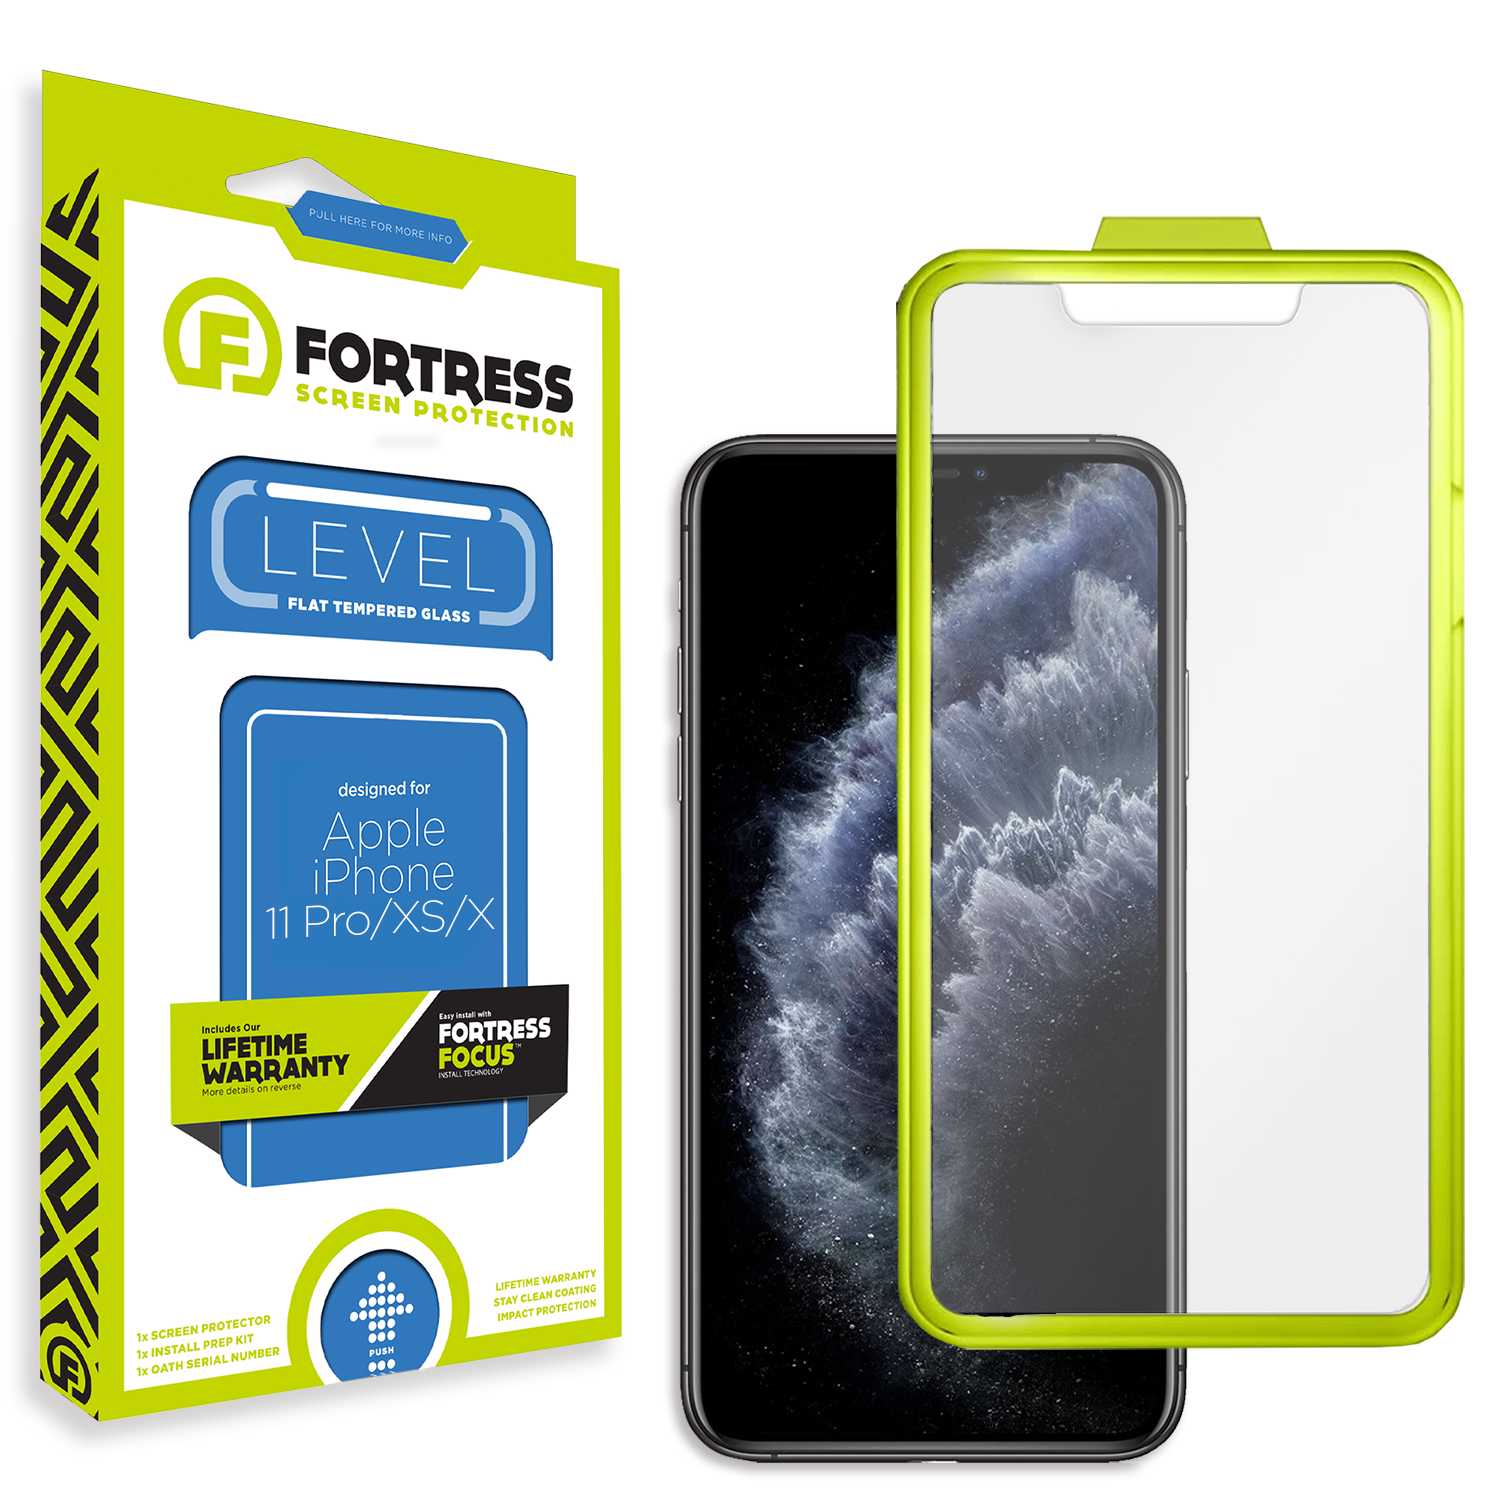 Fortress iPhone XS Screen Protector $0CoverageInstallTool Scooch Screen Protector